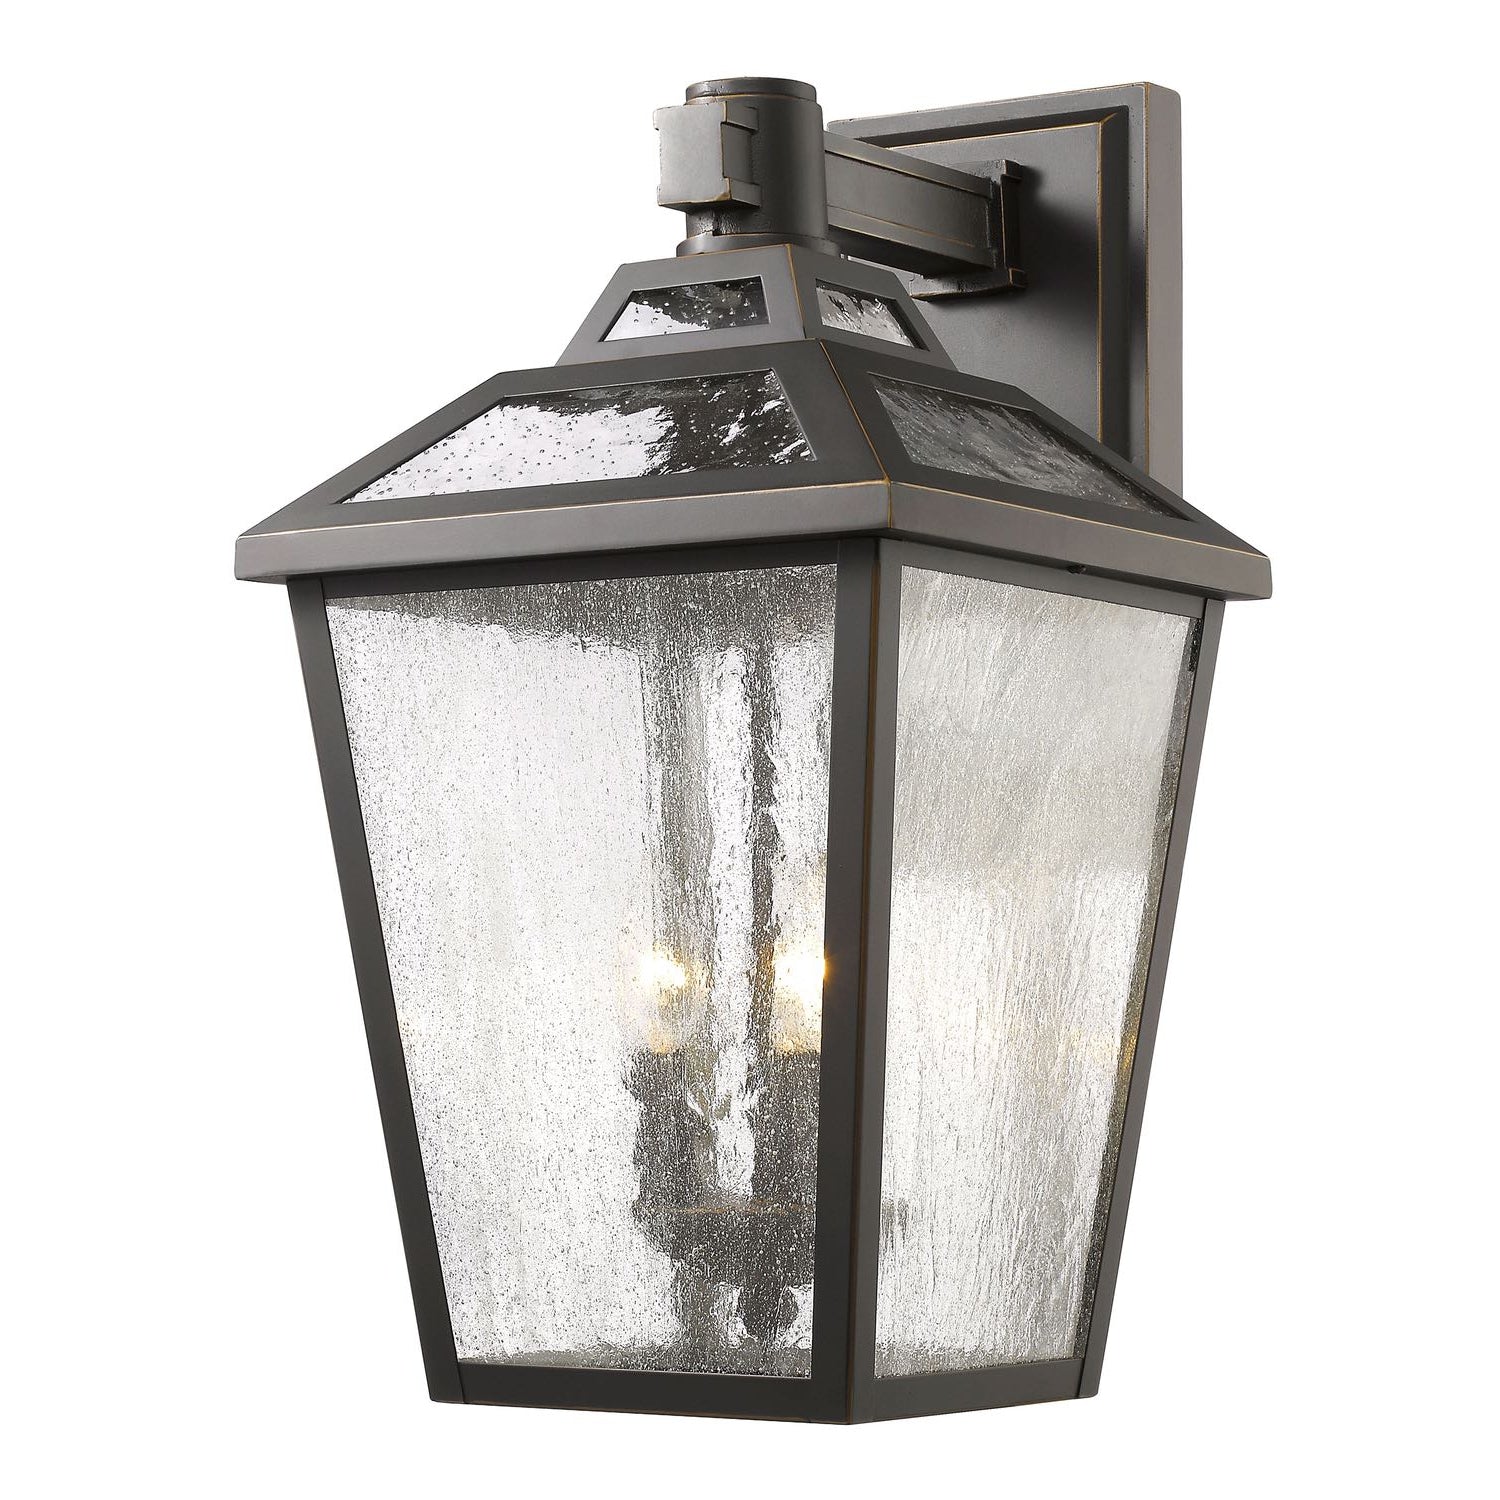 Bayland Outdoor Wall Light Oil Rubbed Bronze